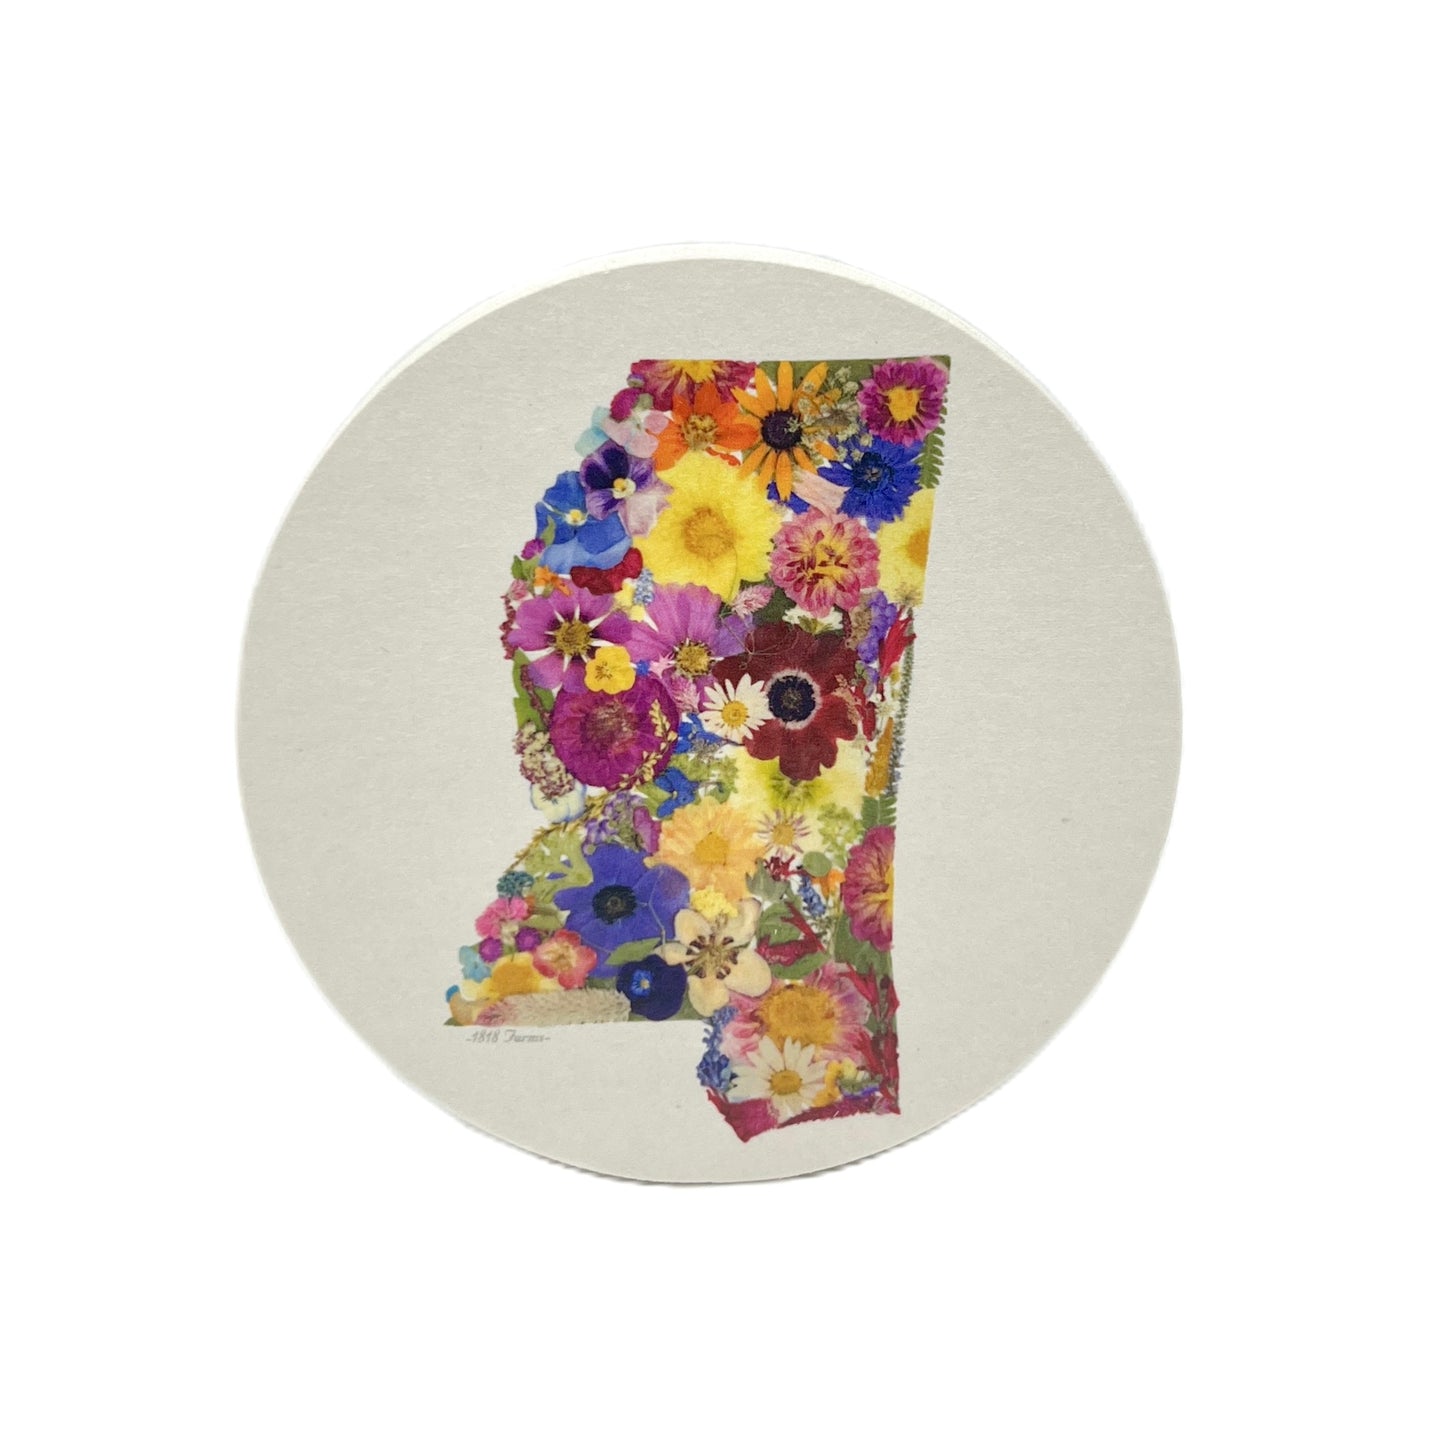 State Themed Drink Coasters (Set of 6) Featuring Dried, Pressed Flowers - "Where I Bloom" Collection Coaster 1818 Farms Mississippi  